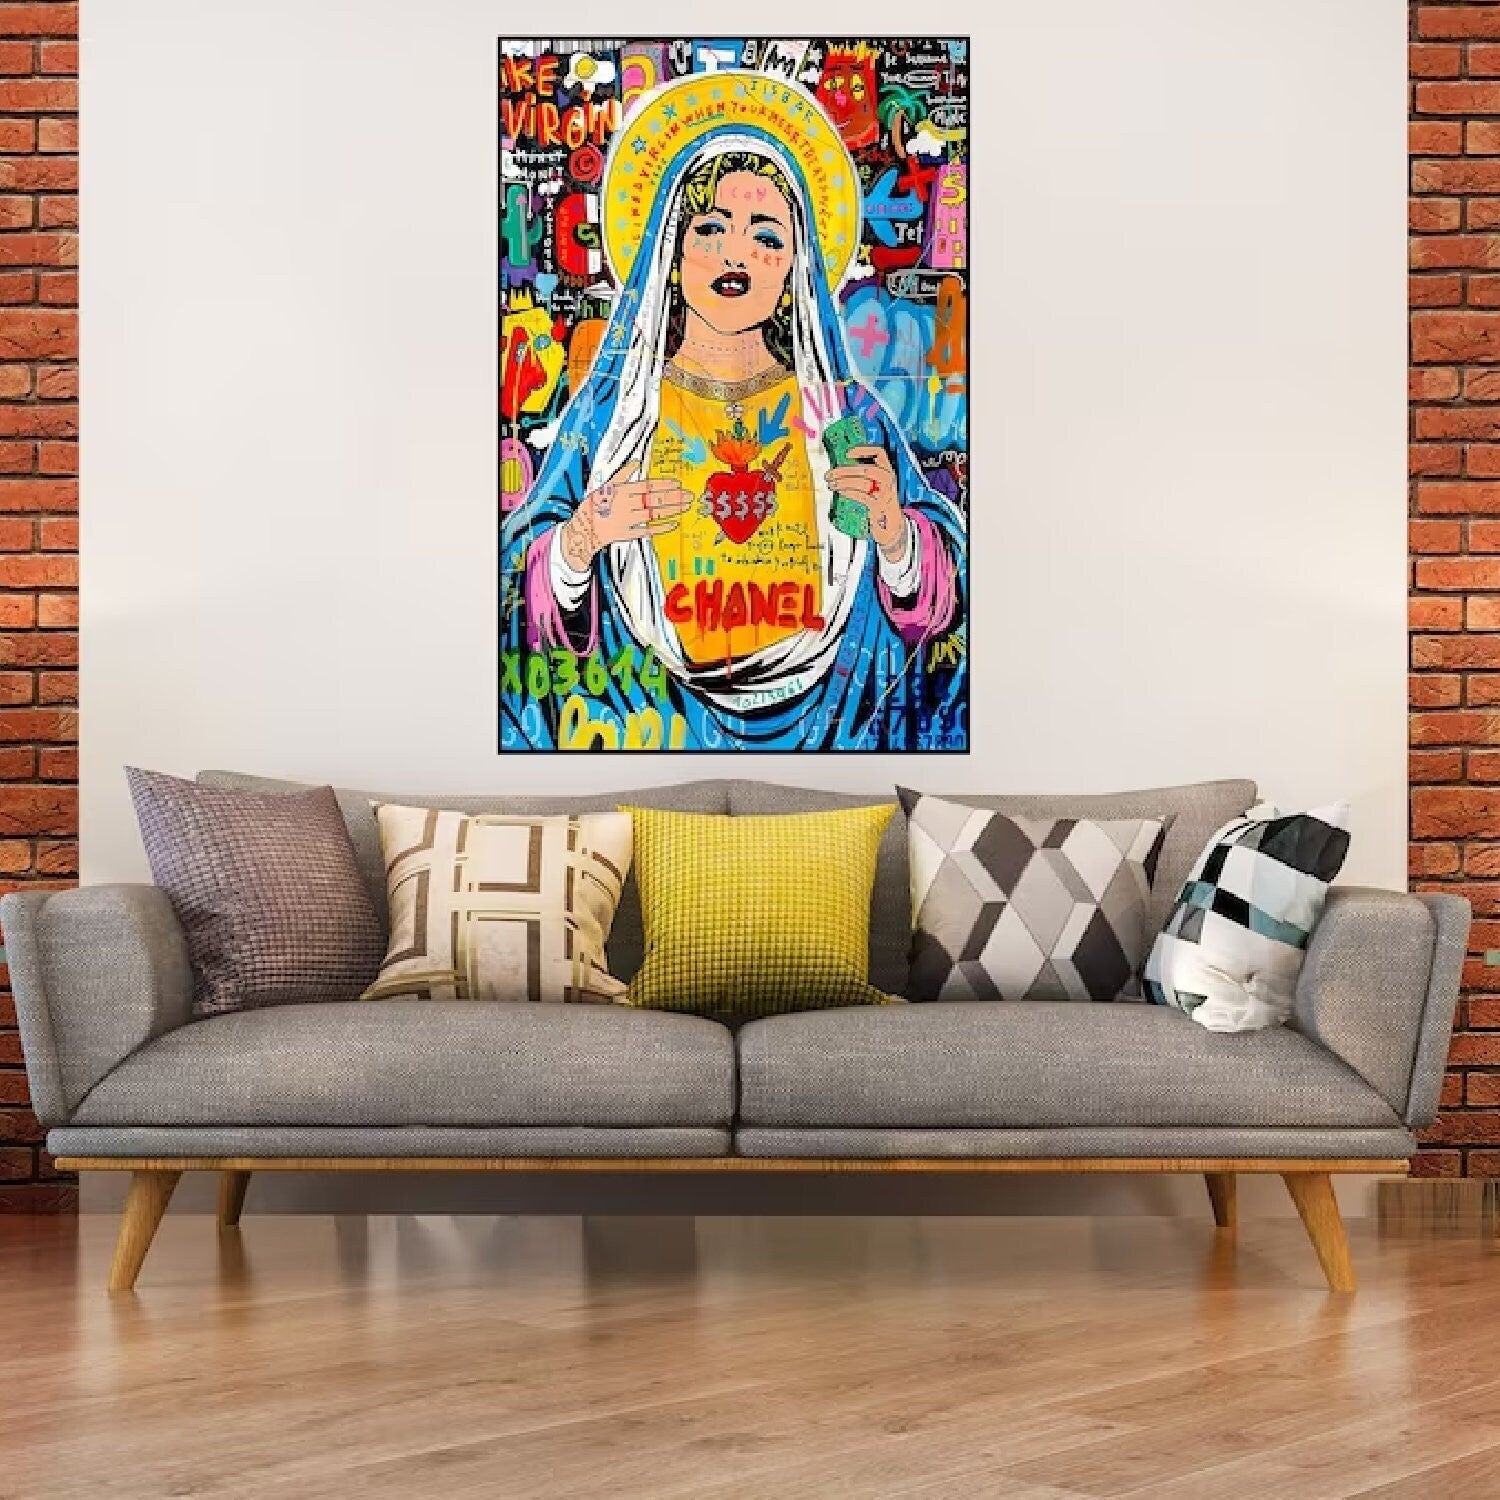 Colorful Woman 100% Hand Painted Pop Art Painting